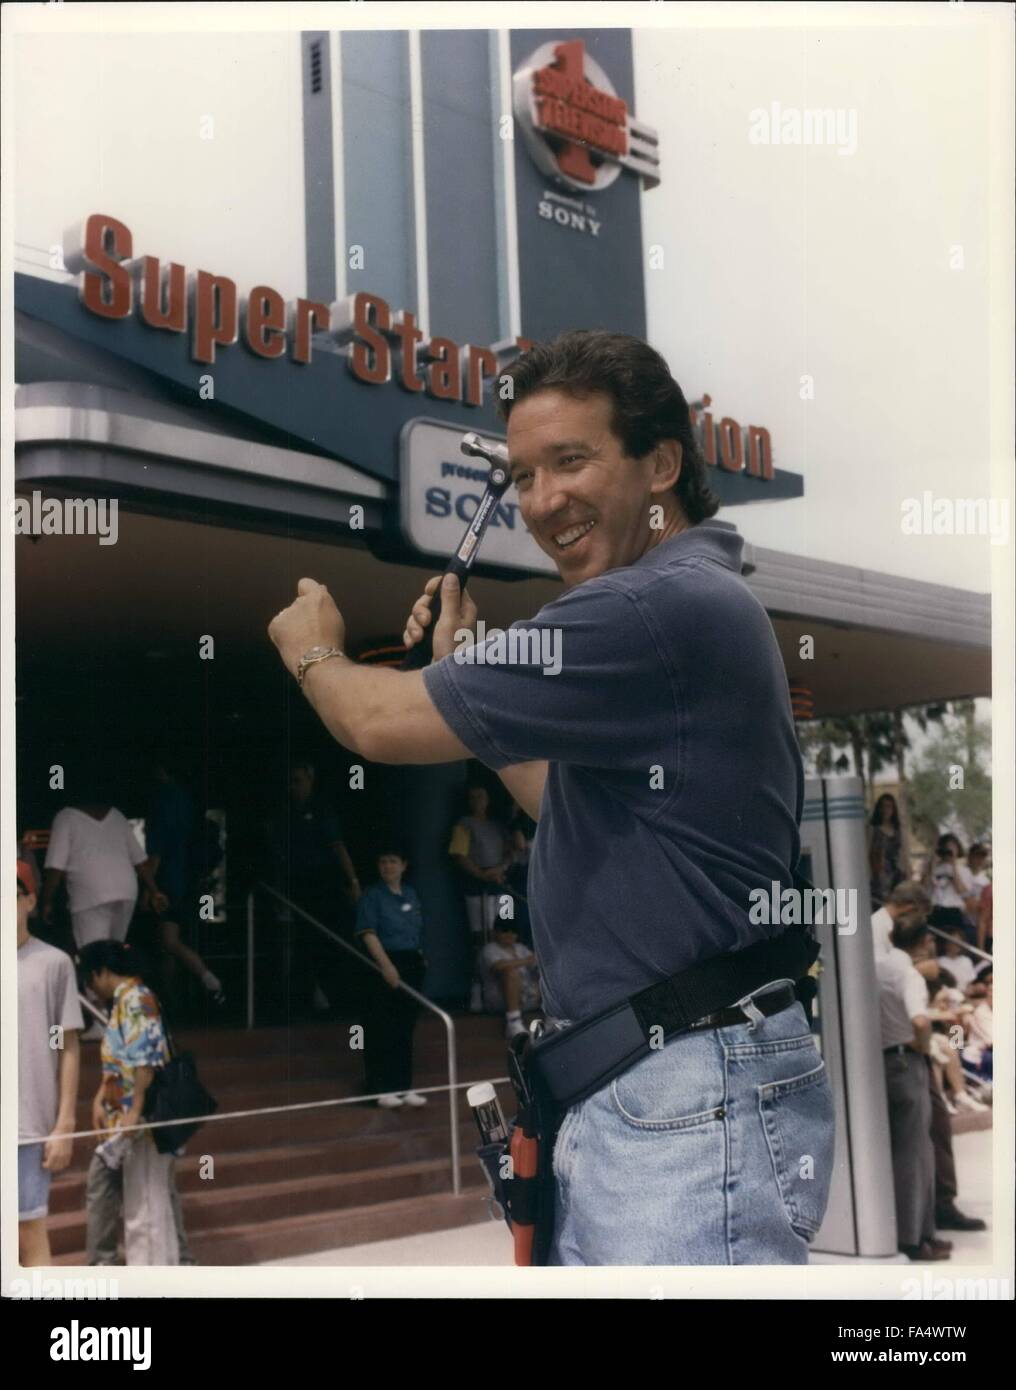 1993 - ''Tool Time'' at Superstar Television: Tim Allen star of the top rated ABC - TV series ''Home Improvement'' has added a renovation of his own to Superstar Television at the Disney MGM Studios Theme Park a new segment of the show! The specially taped entertainment piece from the Walt Disney Company produced TV program involves a contest between Allen and a member of the studio audience. and is now part of the attractions presentation. © Keystone Pictures USA/ZUMAPRESS.com/Alamy Live News Stock Photo